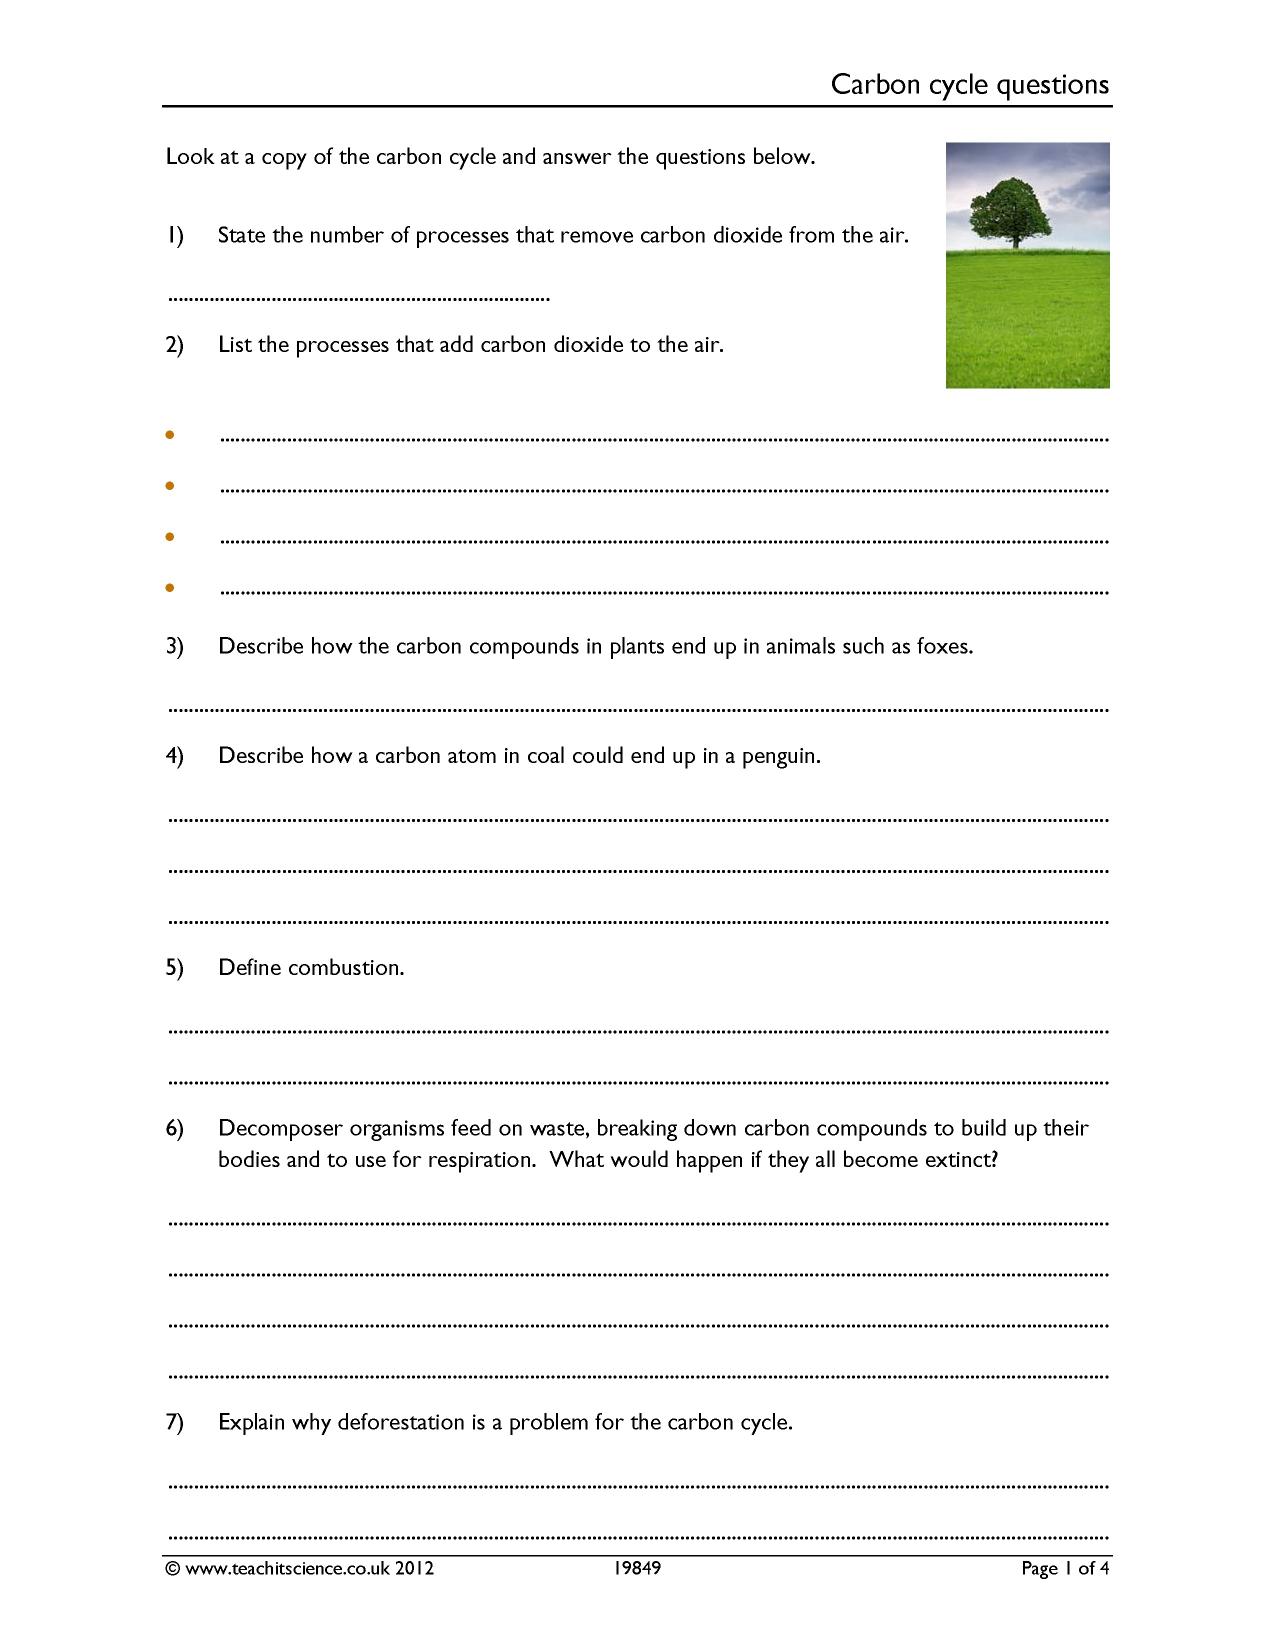 Carbon cycle questions worksheet [pdf] - Teachit Science Pertaining To The Carbon Cycle Worksheet